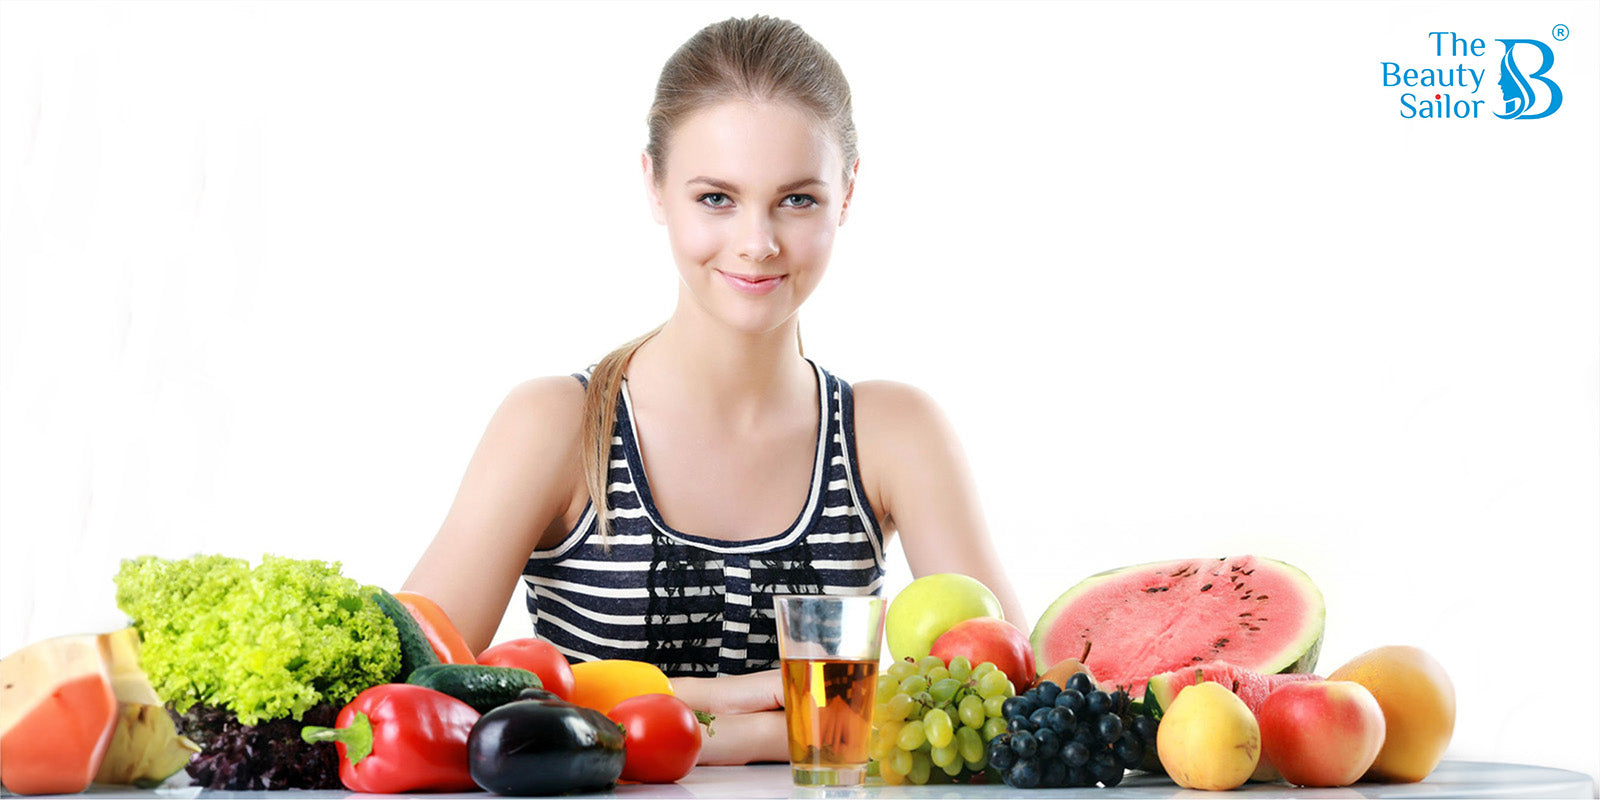 Does Your Diet Affect Skin Glow? Find Out How!